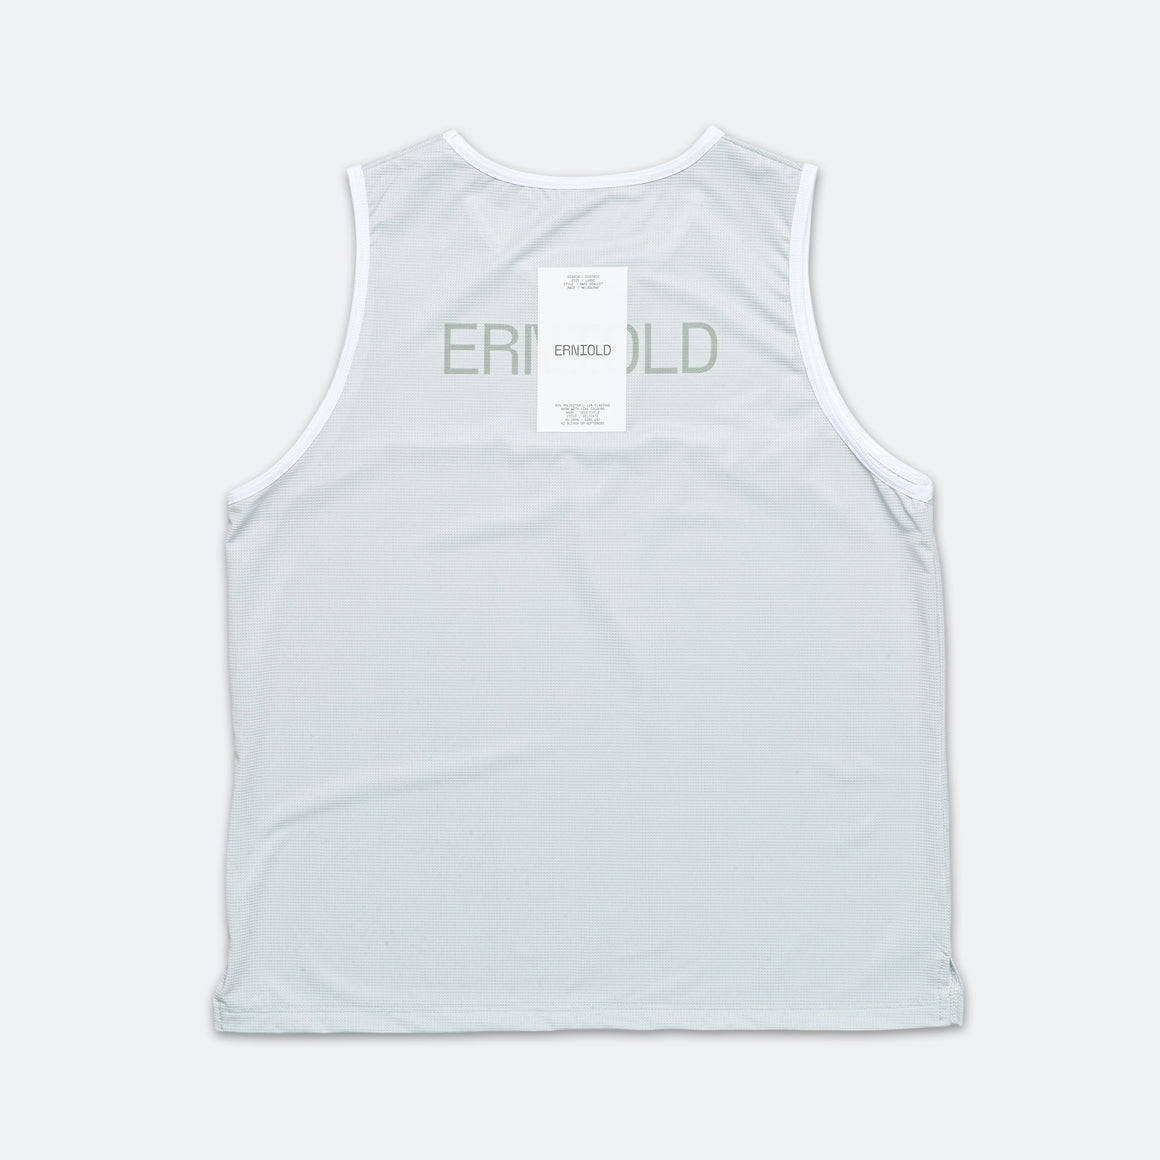 Erniold - Womens Race Singlet - Light Moss - Up There Athletics